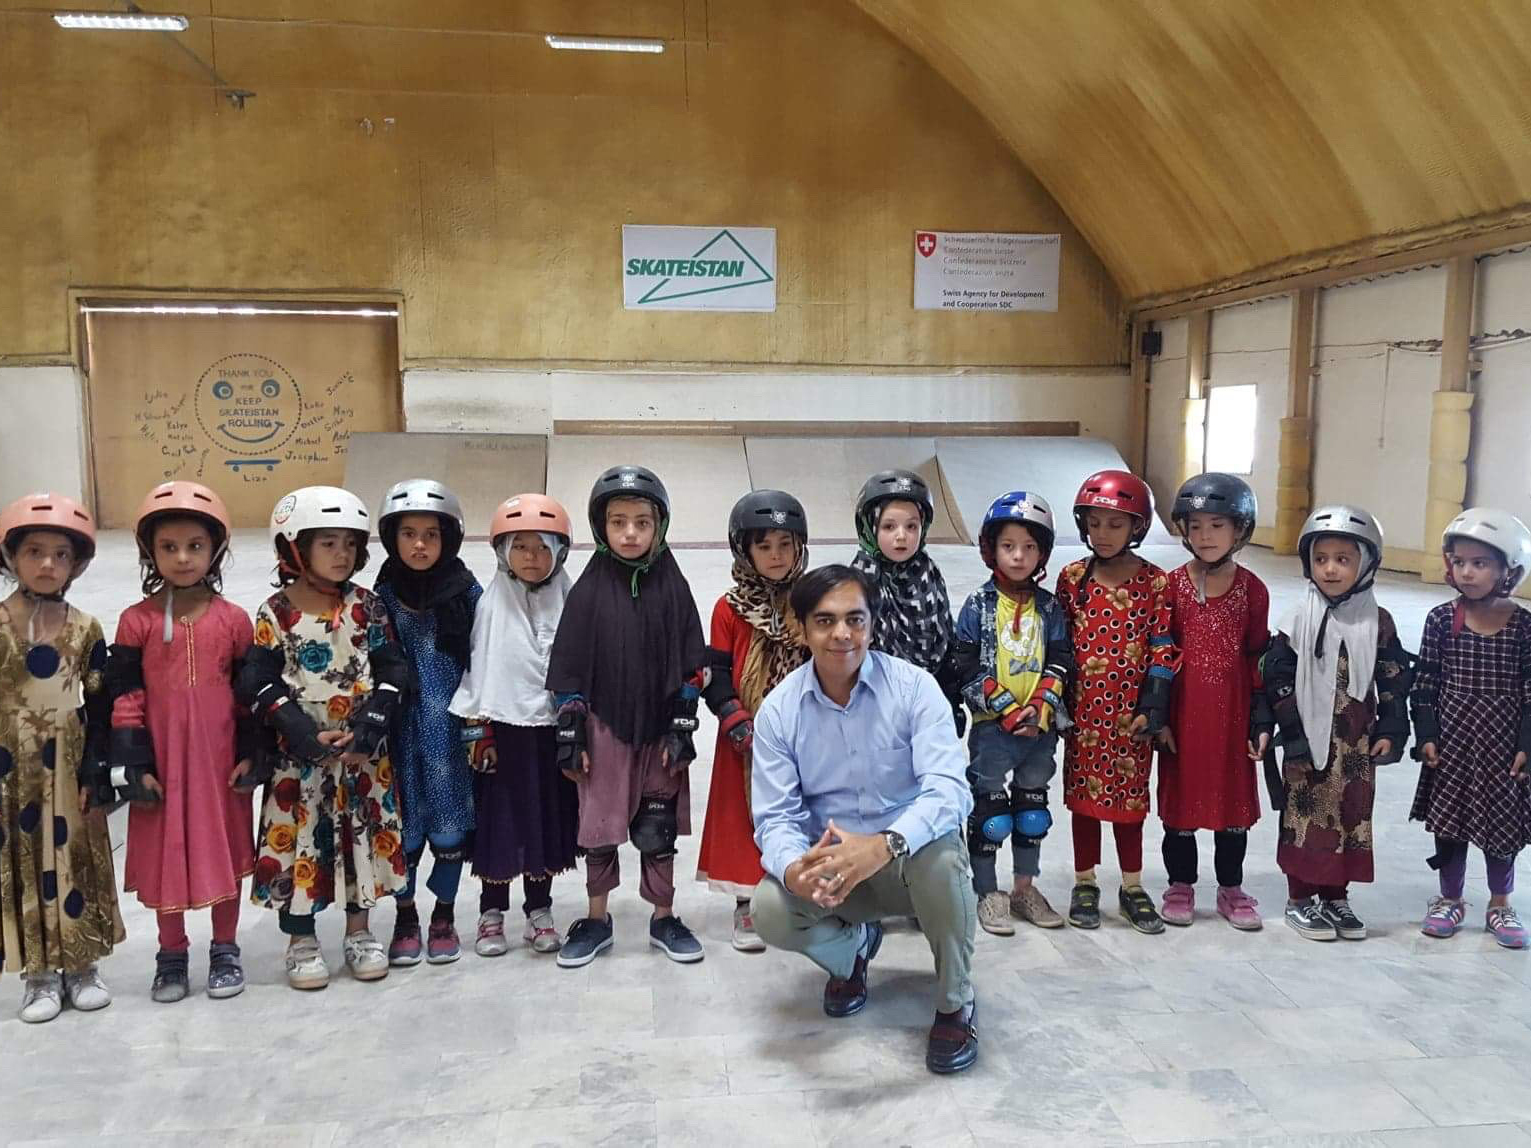 Soroush Kazemi with young girls in helmets and elbow pads at Skateistan